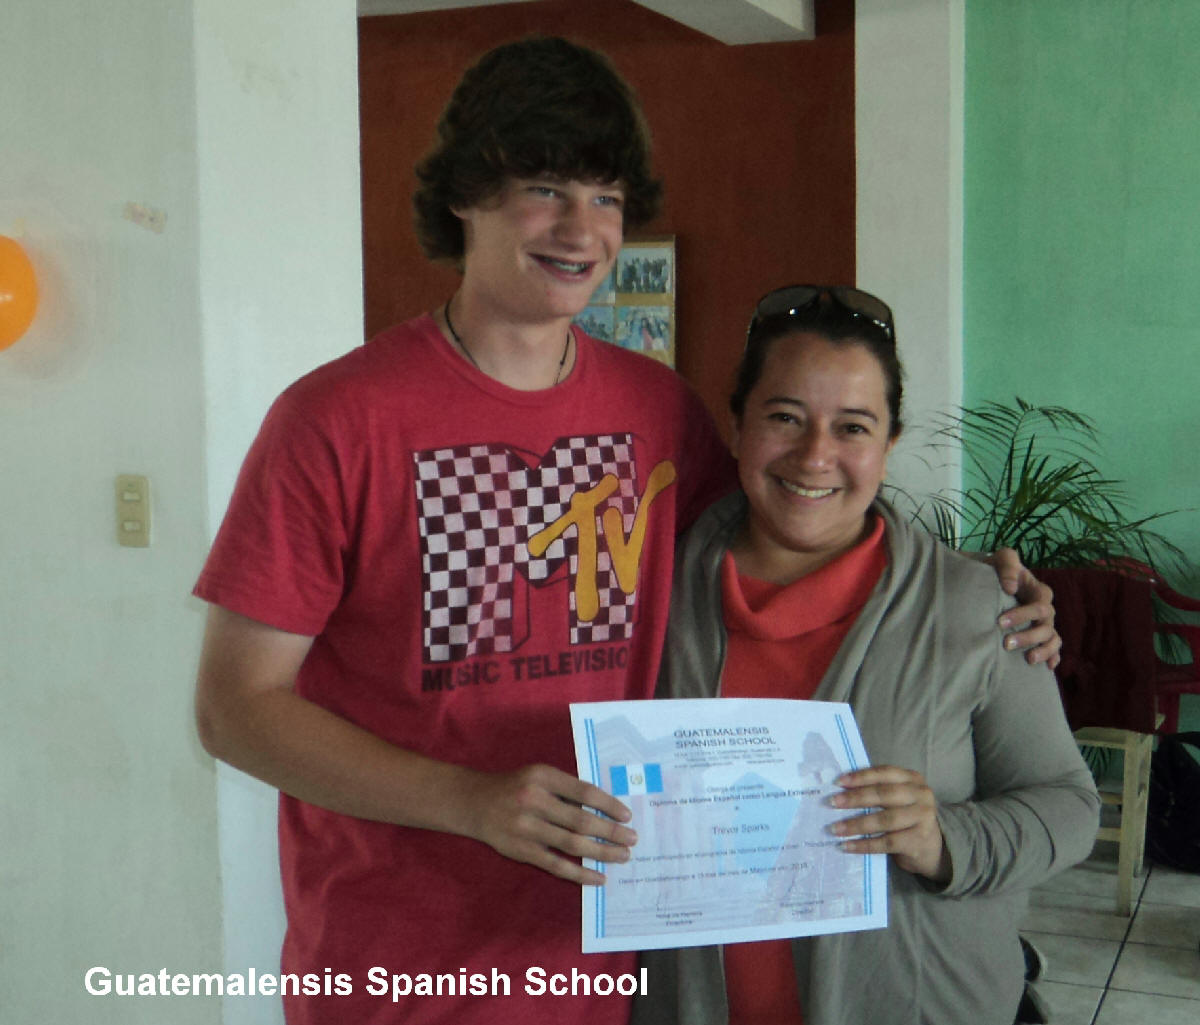 In Guatemalensis Spanish School you will find professional and friendly teachers